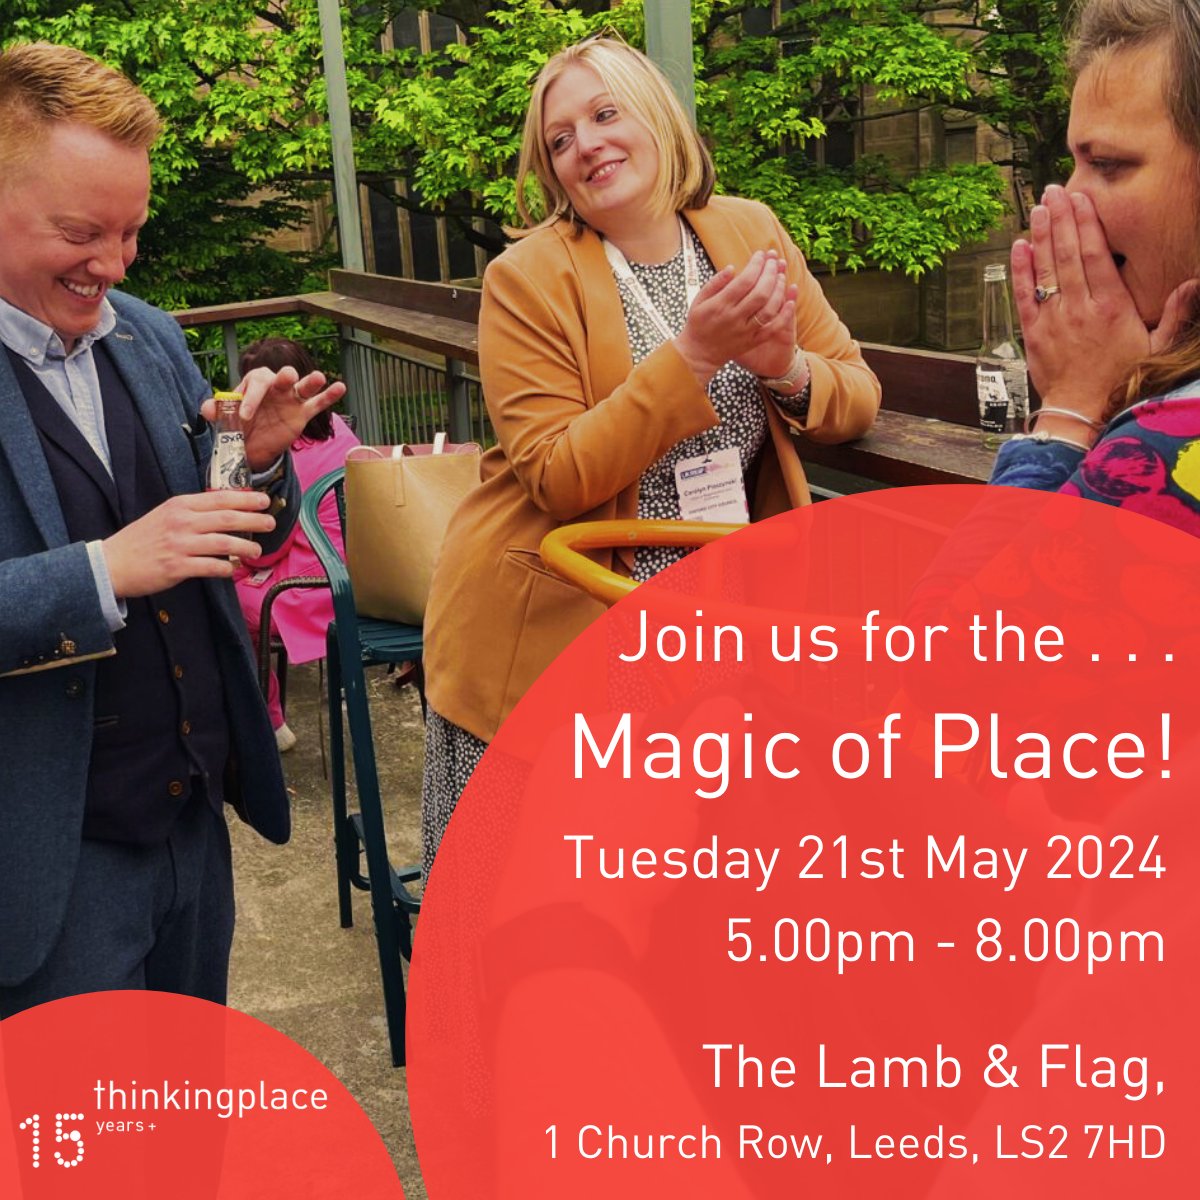 Looking forward to returning to #Leeds from 21-23 May for this year’s @UKREiiF event & excited to be hosting our ‘Magic of Place’ drinks reception again. Enjoy chatting with the team & like minded ‘place people’; the drinks, canapes & magic are on us! bit.ly/3IT5HvG